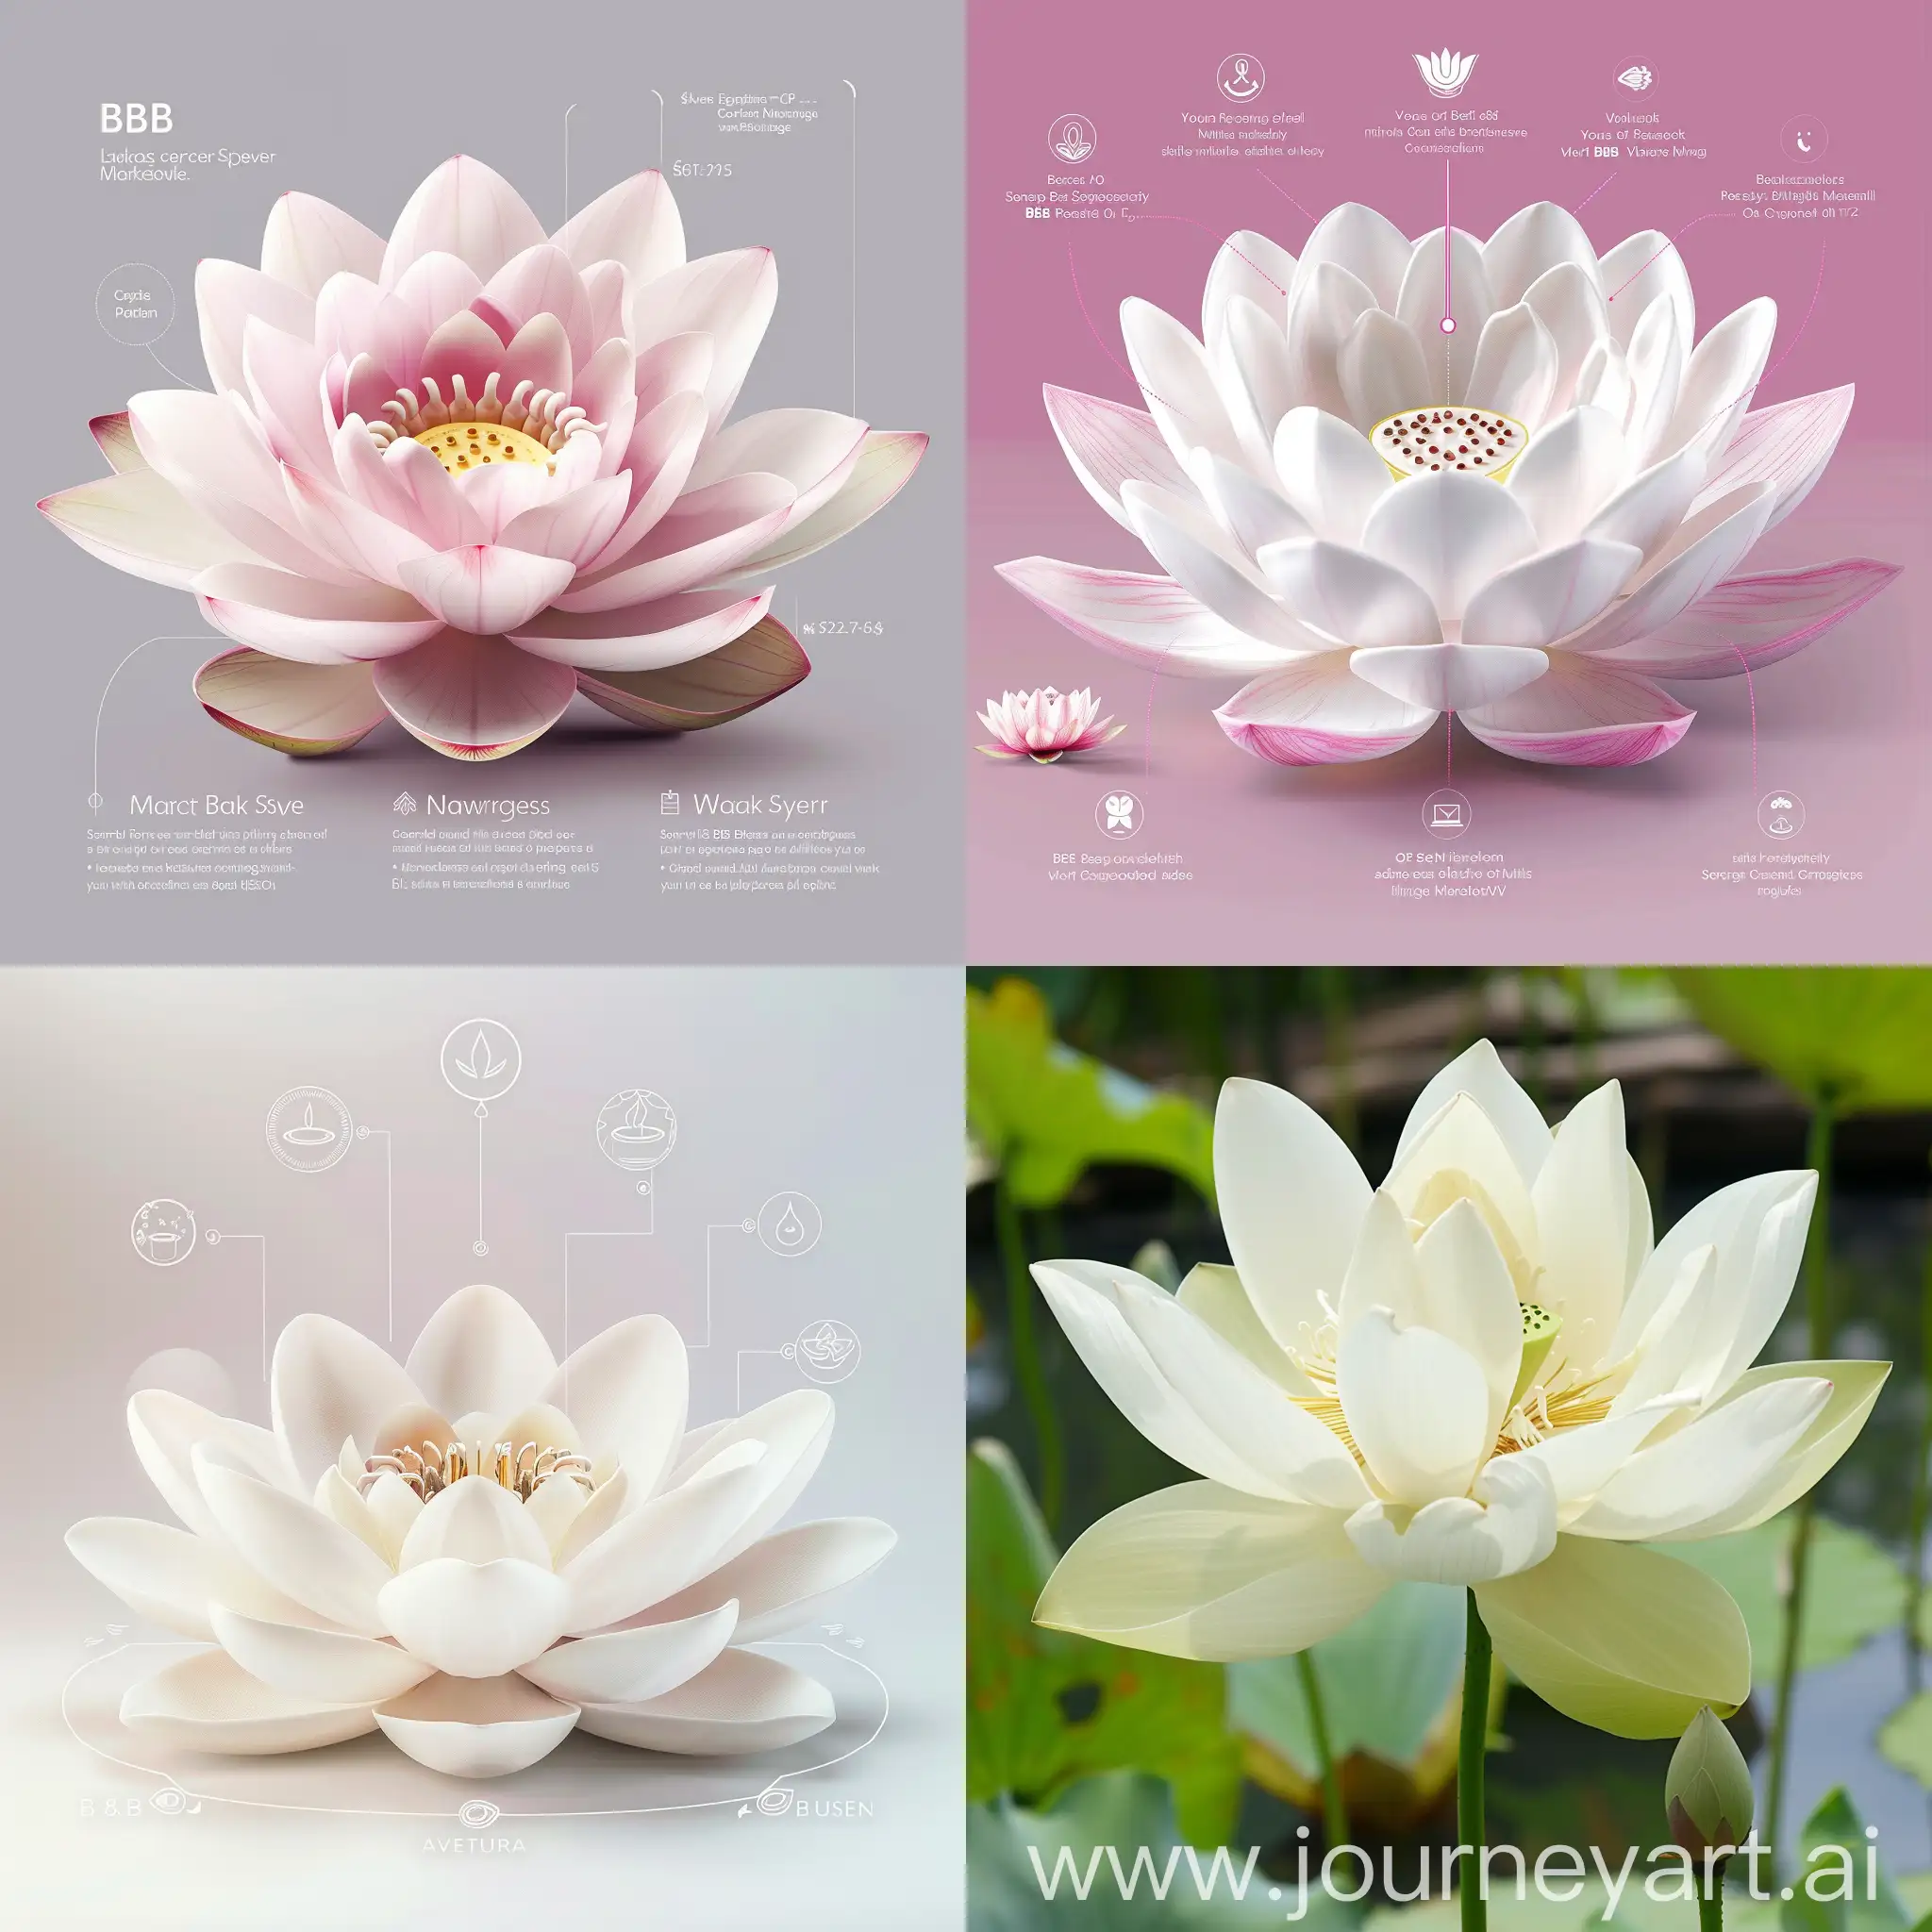 B2B-Service-and-Plumbing-Installation-with-Lotus-Blossom-Theme